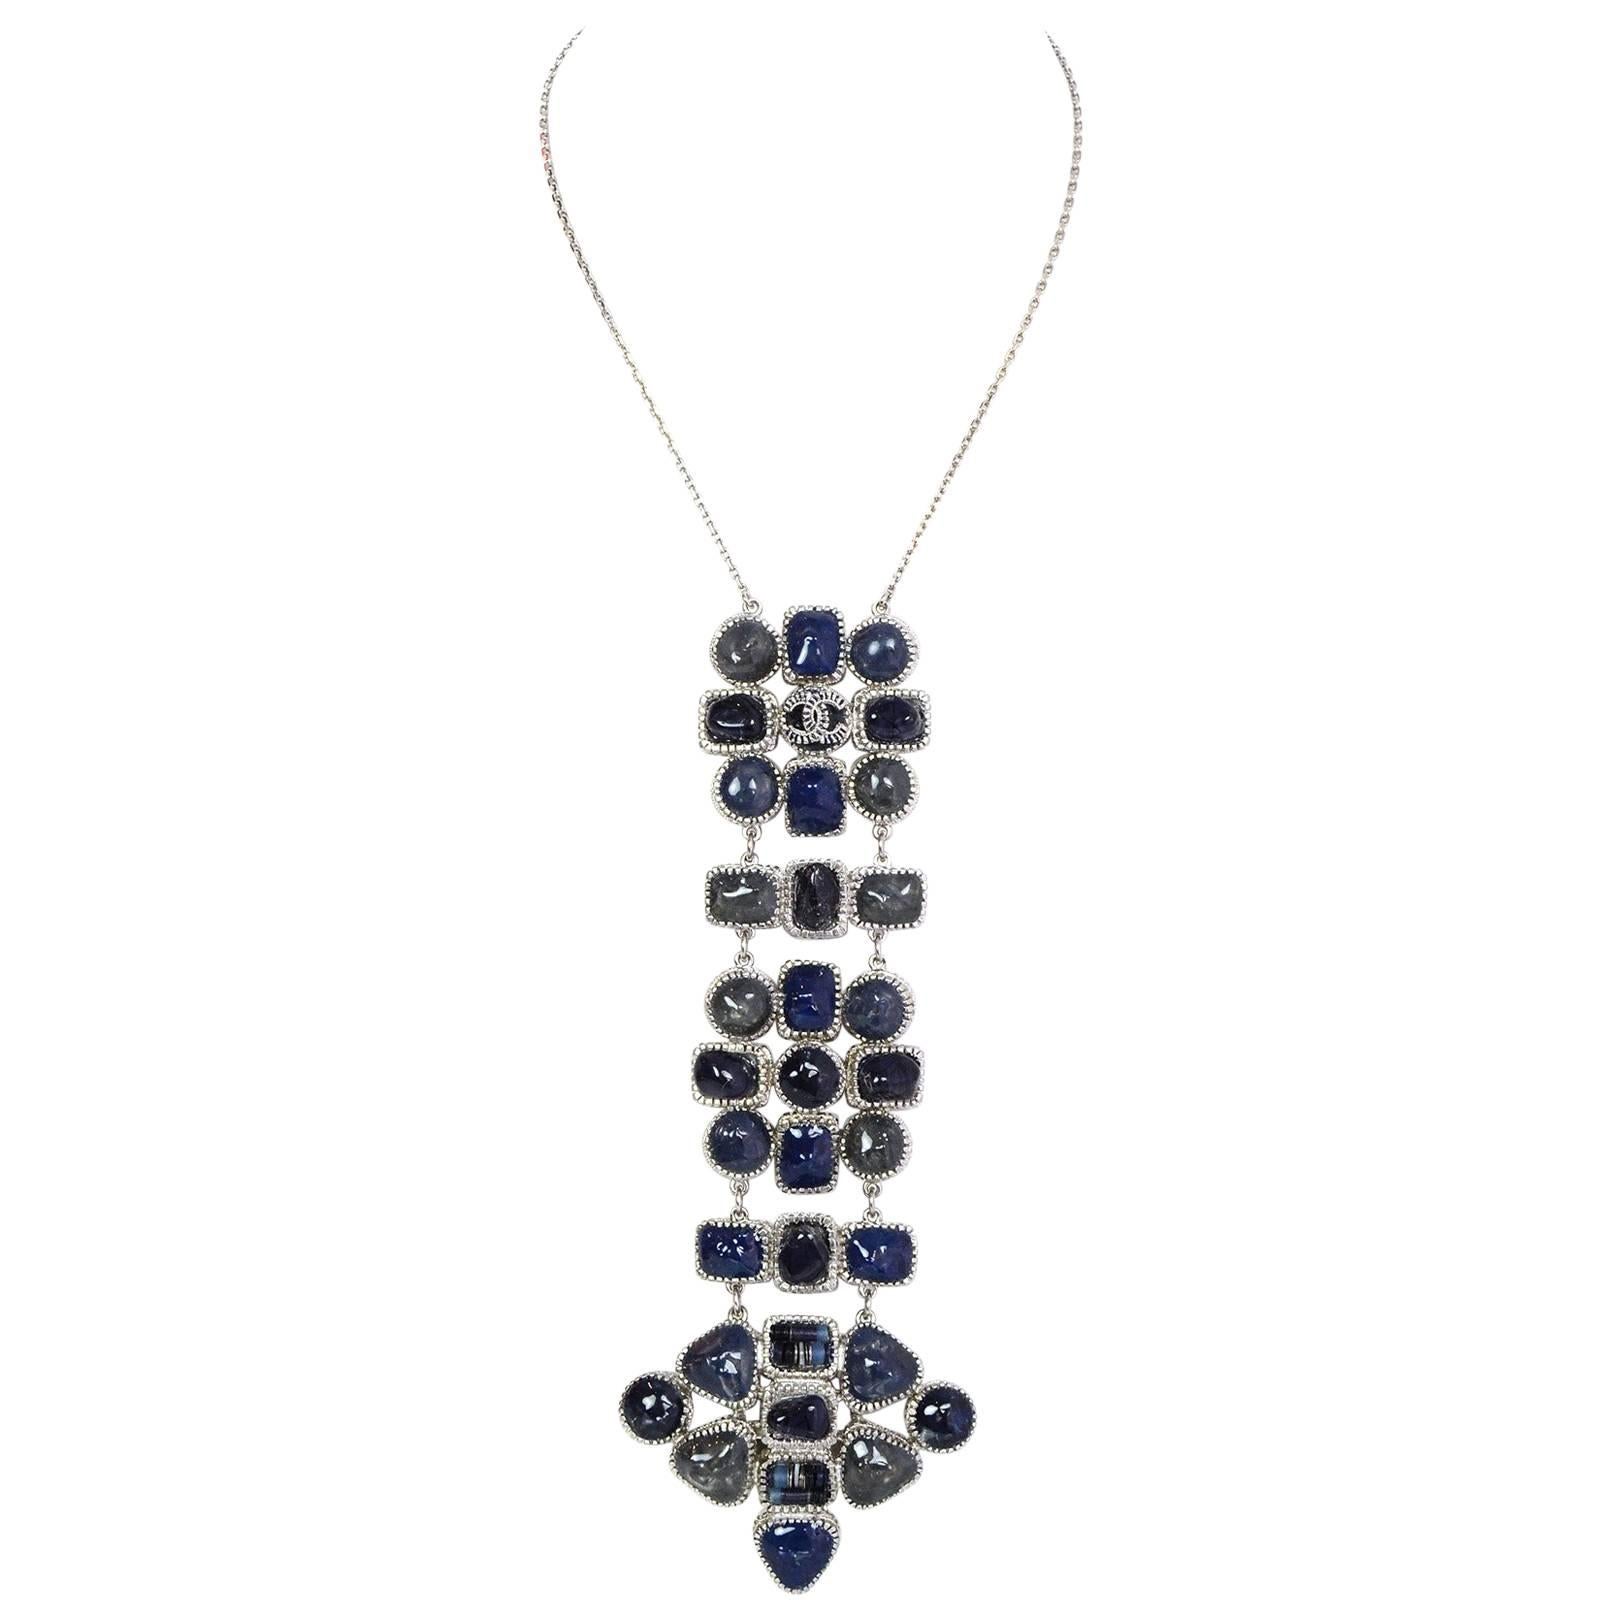 Chanel Blue Stone Long Pendant Necklace
Features pin back closure on back of pendant to keep necklace in place

Made In: France
Year of Production: 2014
Color: Silvertone and different shades of blue
Materials: Metal and stone/glass
Closure/Opening: